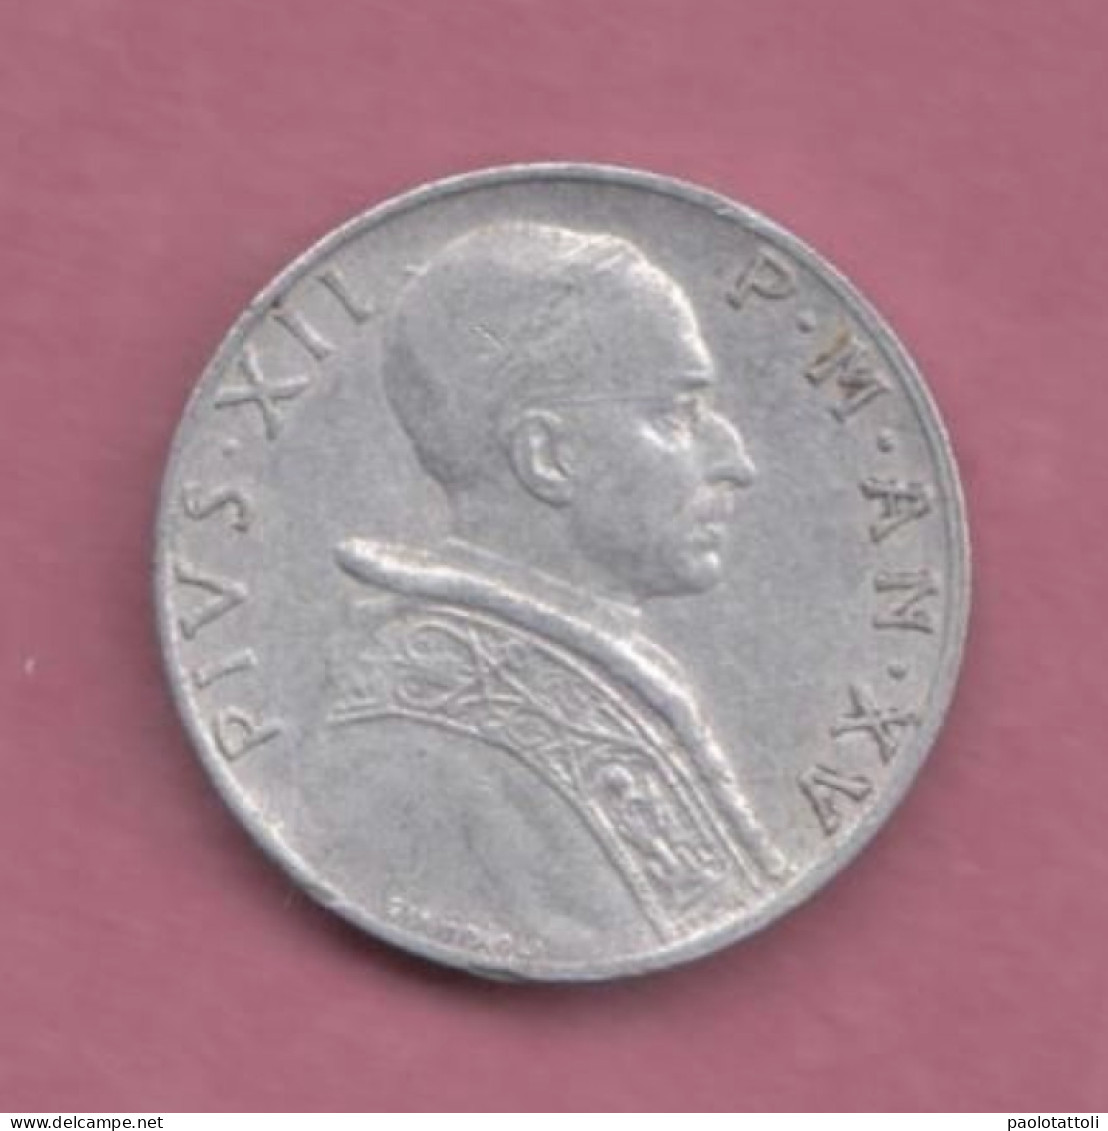 Vaticano, 1955-5 Lire- Alluminium-  Pope Pius XII- Obverse Bust Of Pope . Reverse Justice Standing With Sword And Scales - Vatican